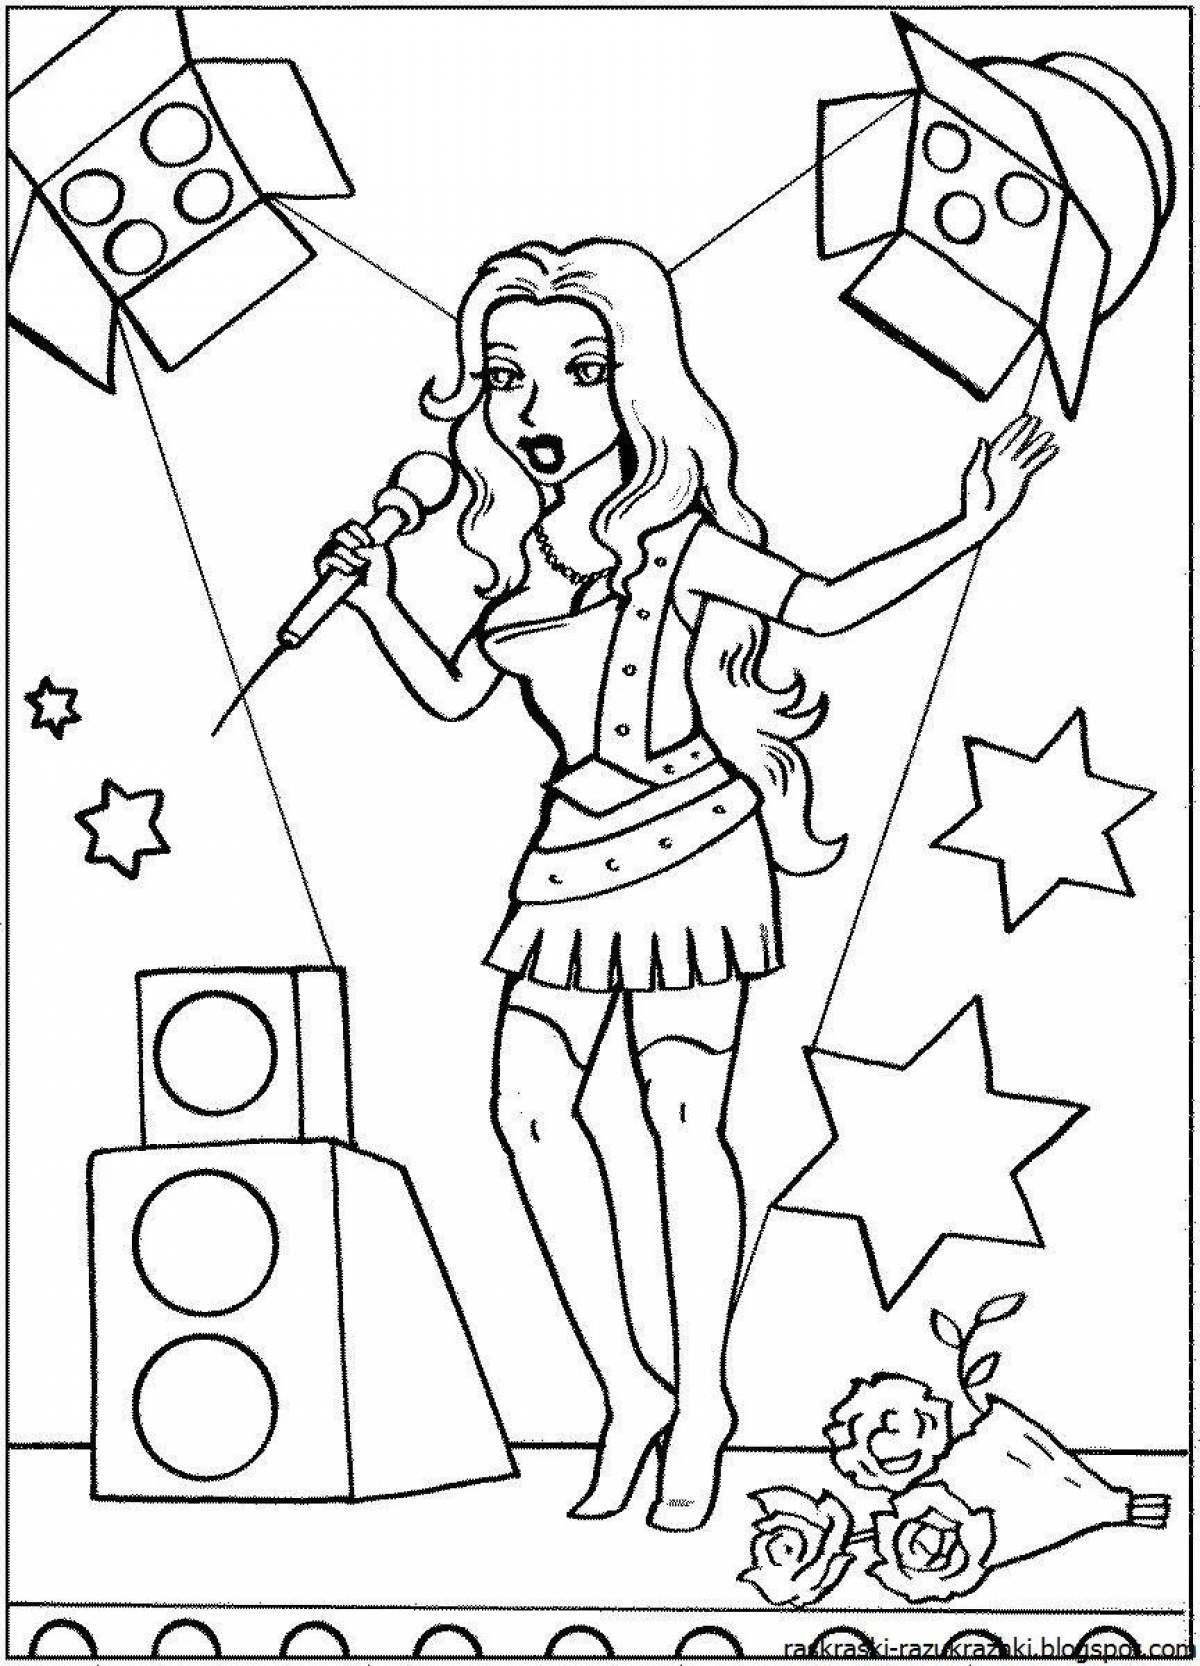 Innovative 1st class profession coloring pages